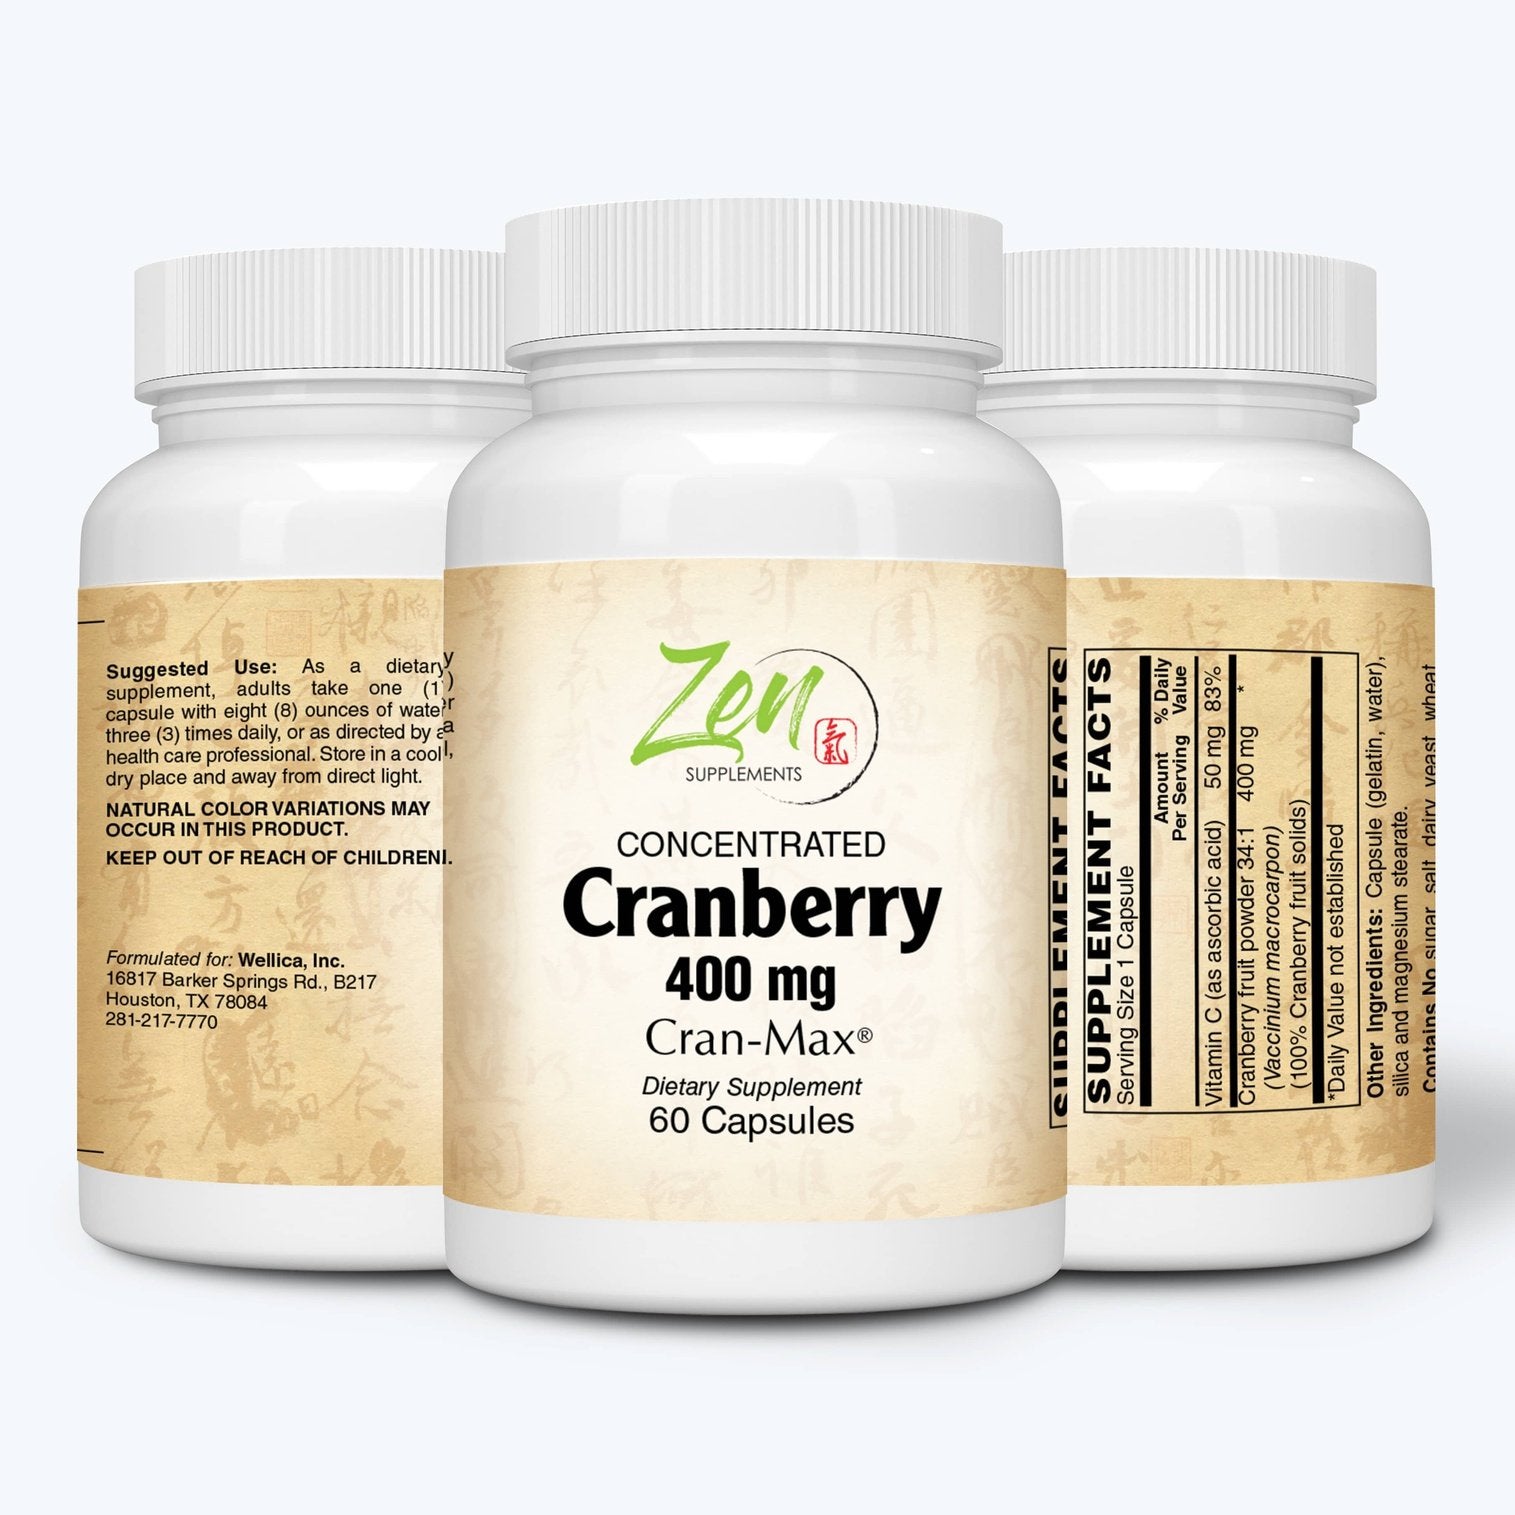 Zen Supplements - Cranberry Concentrate 400 Mg with Cran-MAX®for Kidney Support, Bladder Health & Urinary Tract Health 60-Caps